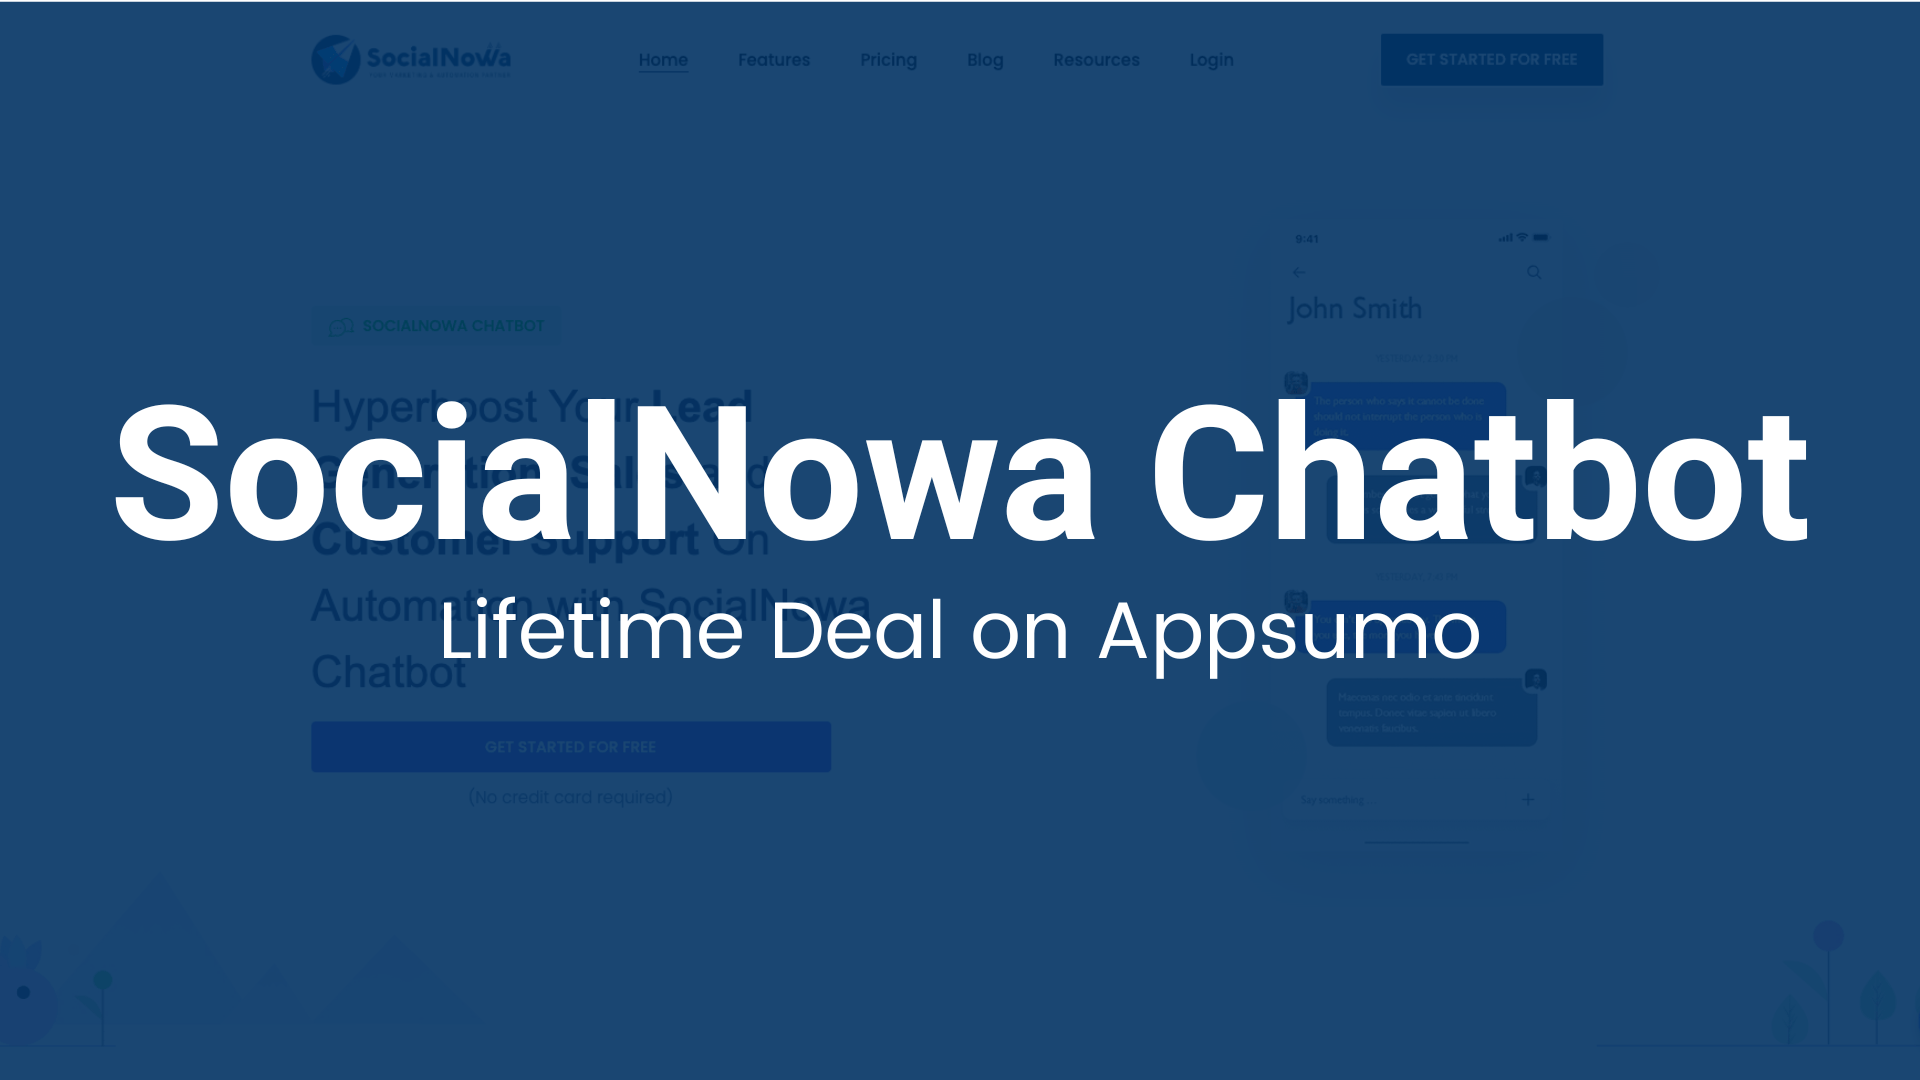 SocialNowa Chatbot: Automate Chat Flows to Boost Engagement, Leads, and Sales